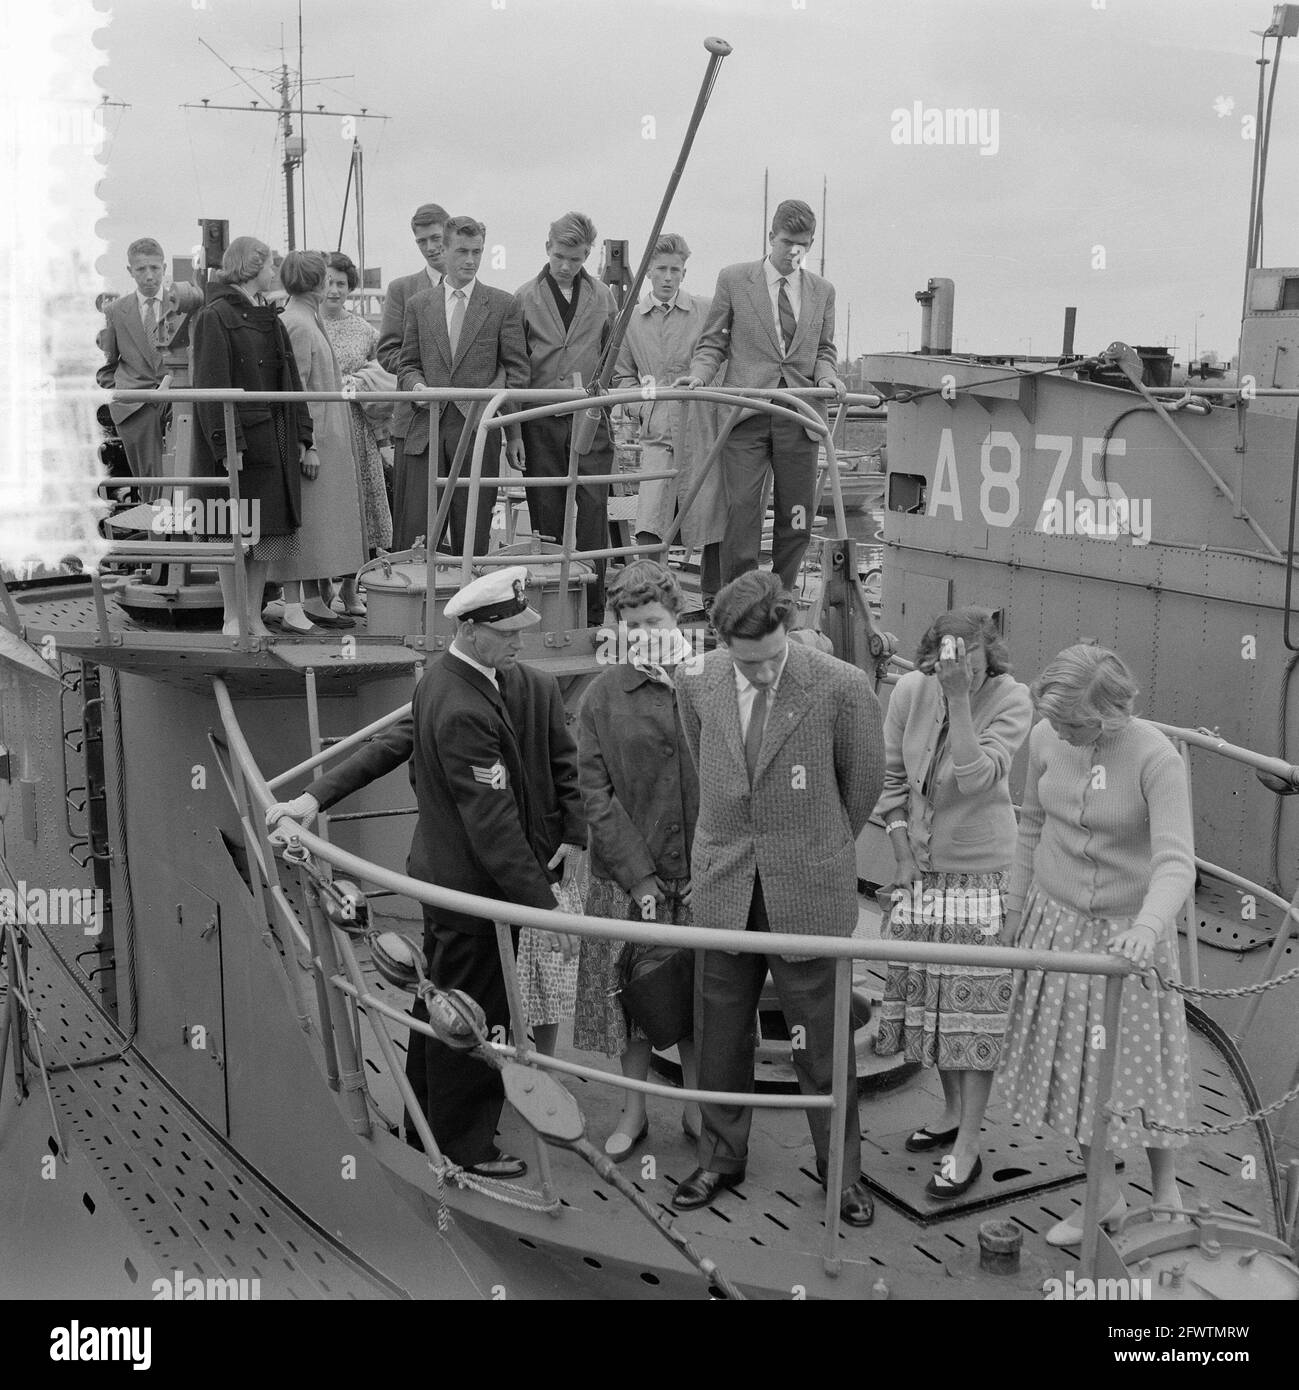 Submarine Service 50 years, May 29, 1957, UNDERSTANDING, The Netherlands, 20th century press agency photo, news to remember, documentary, historic photography 1945-1990, visual stories, human history of the Twentieth Century, capturing moments in time Stock Photo